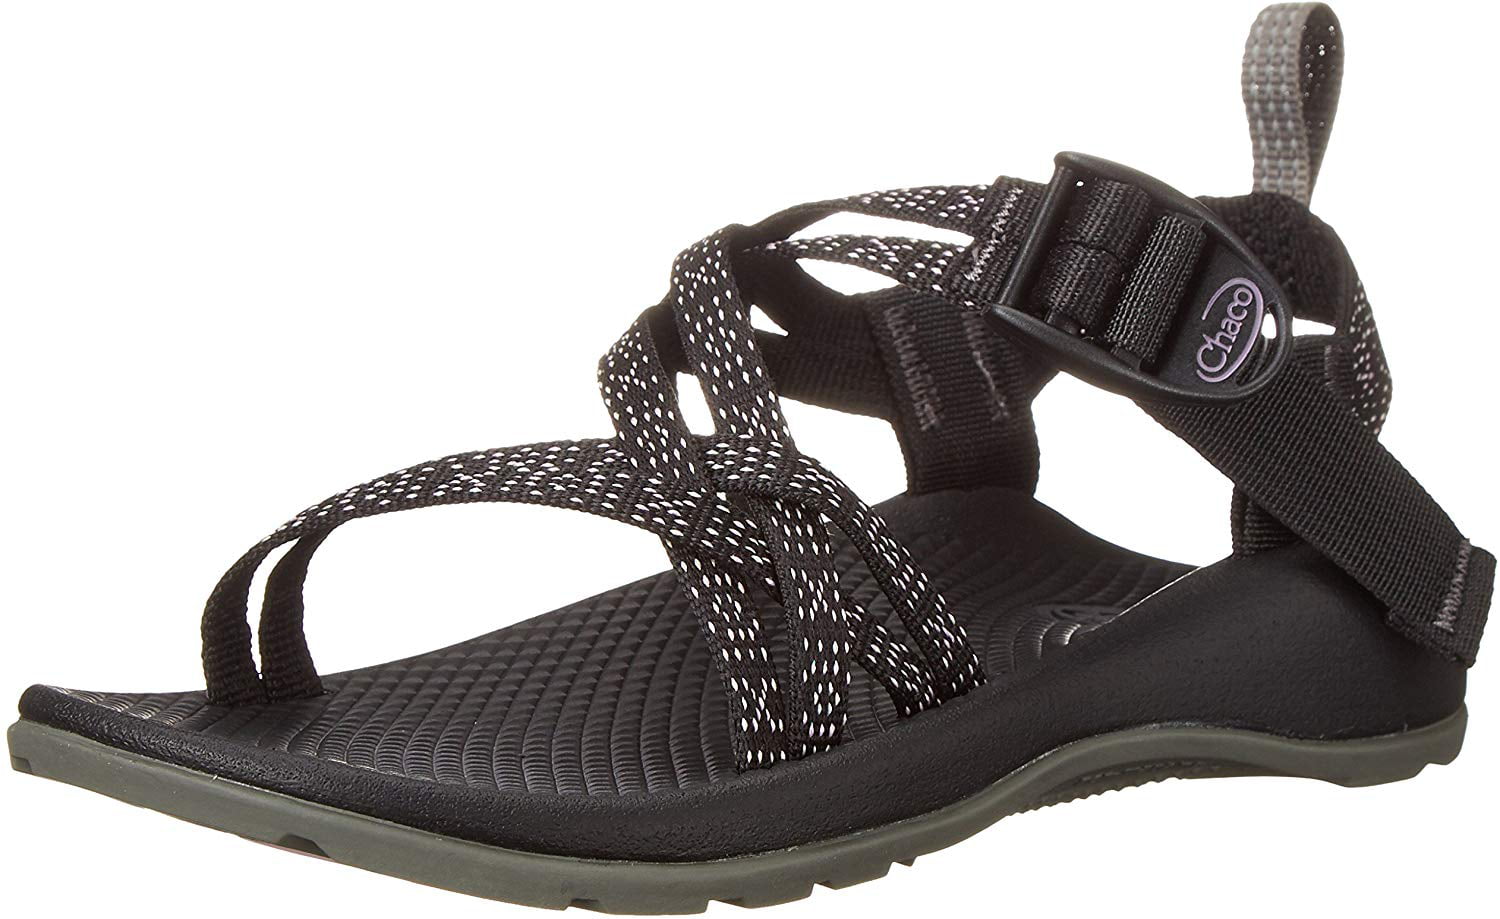 chacos zx1